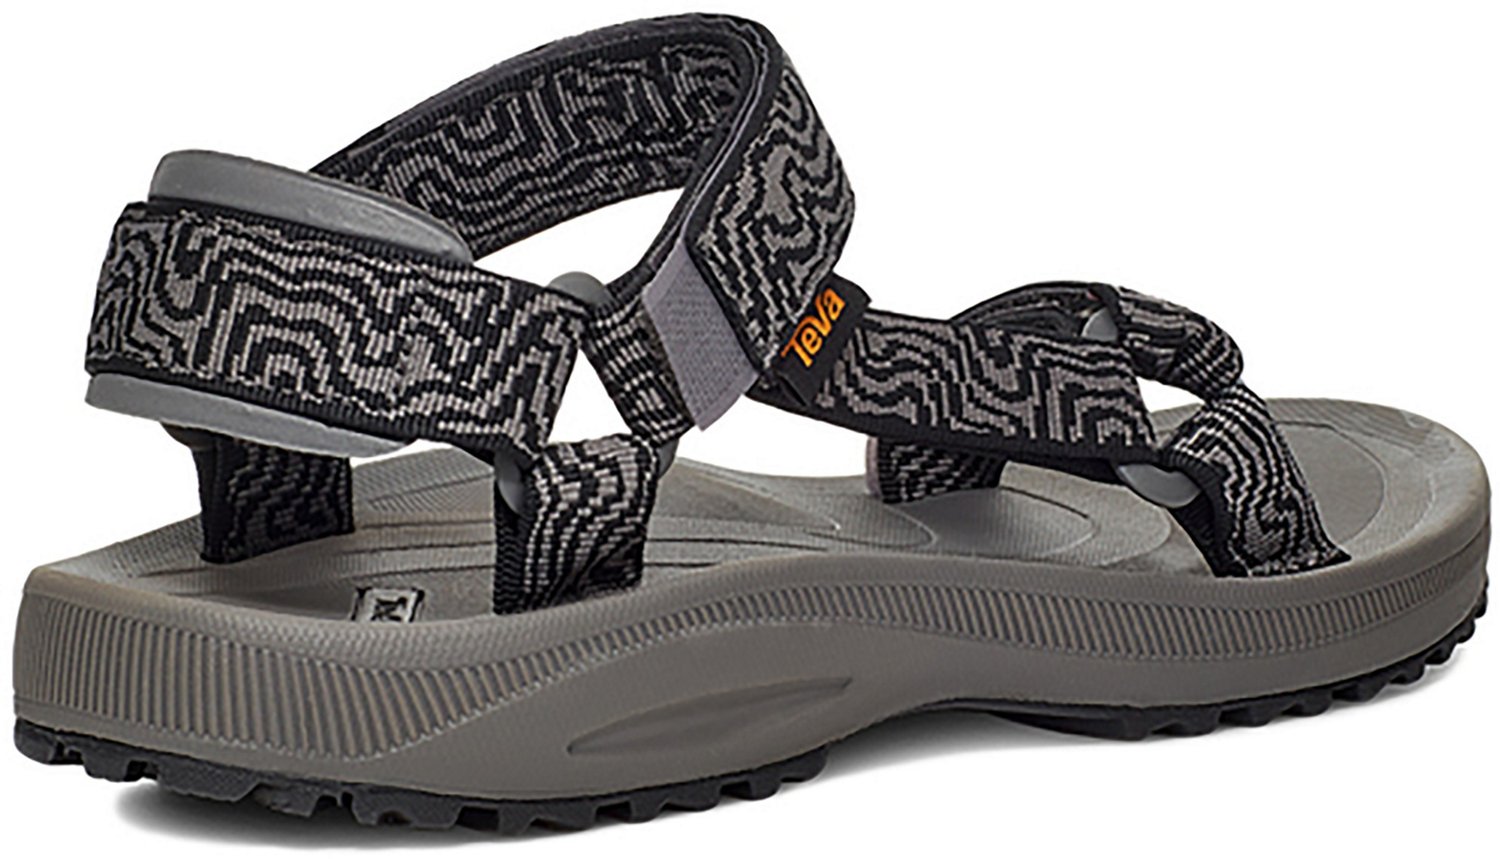 Teva Men’s Winstead Sandals | Free Shipping at Academy